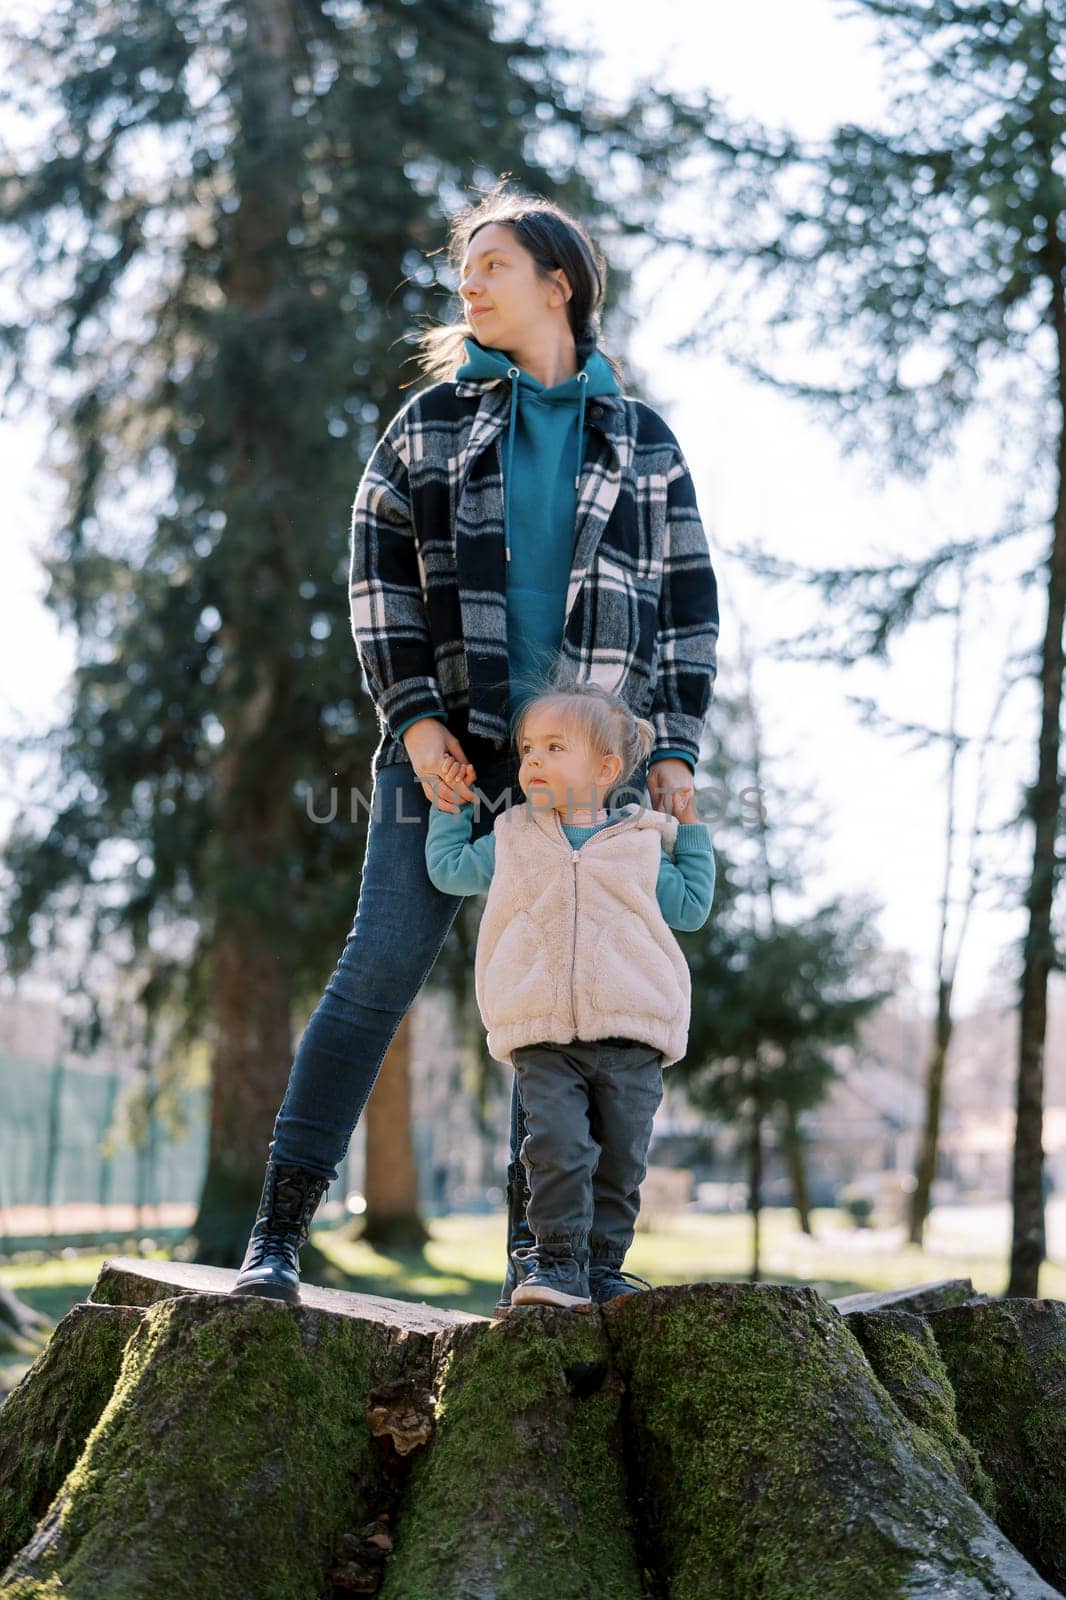 Mom with a little girl stand on a huge stump in a sunny meadow and look away. High quality photo